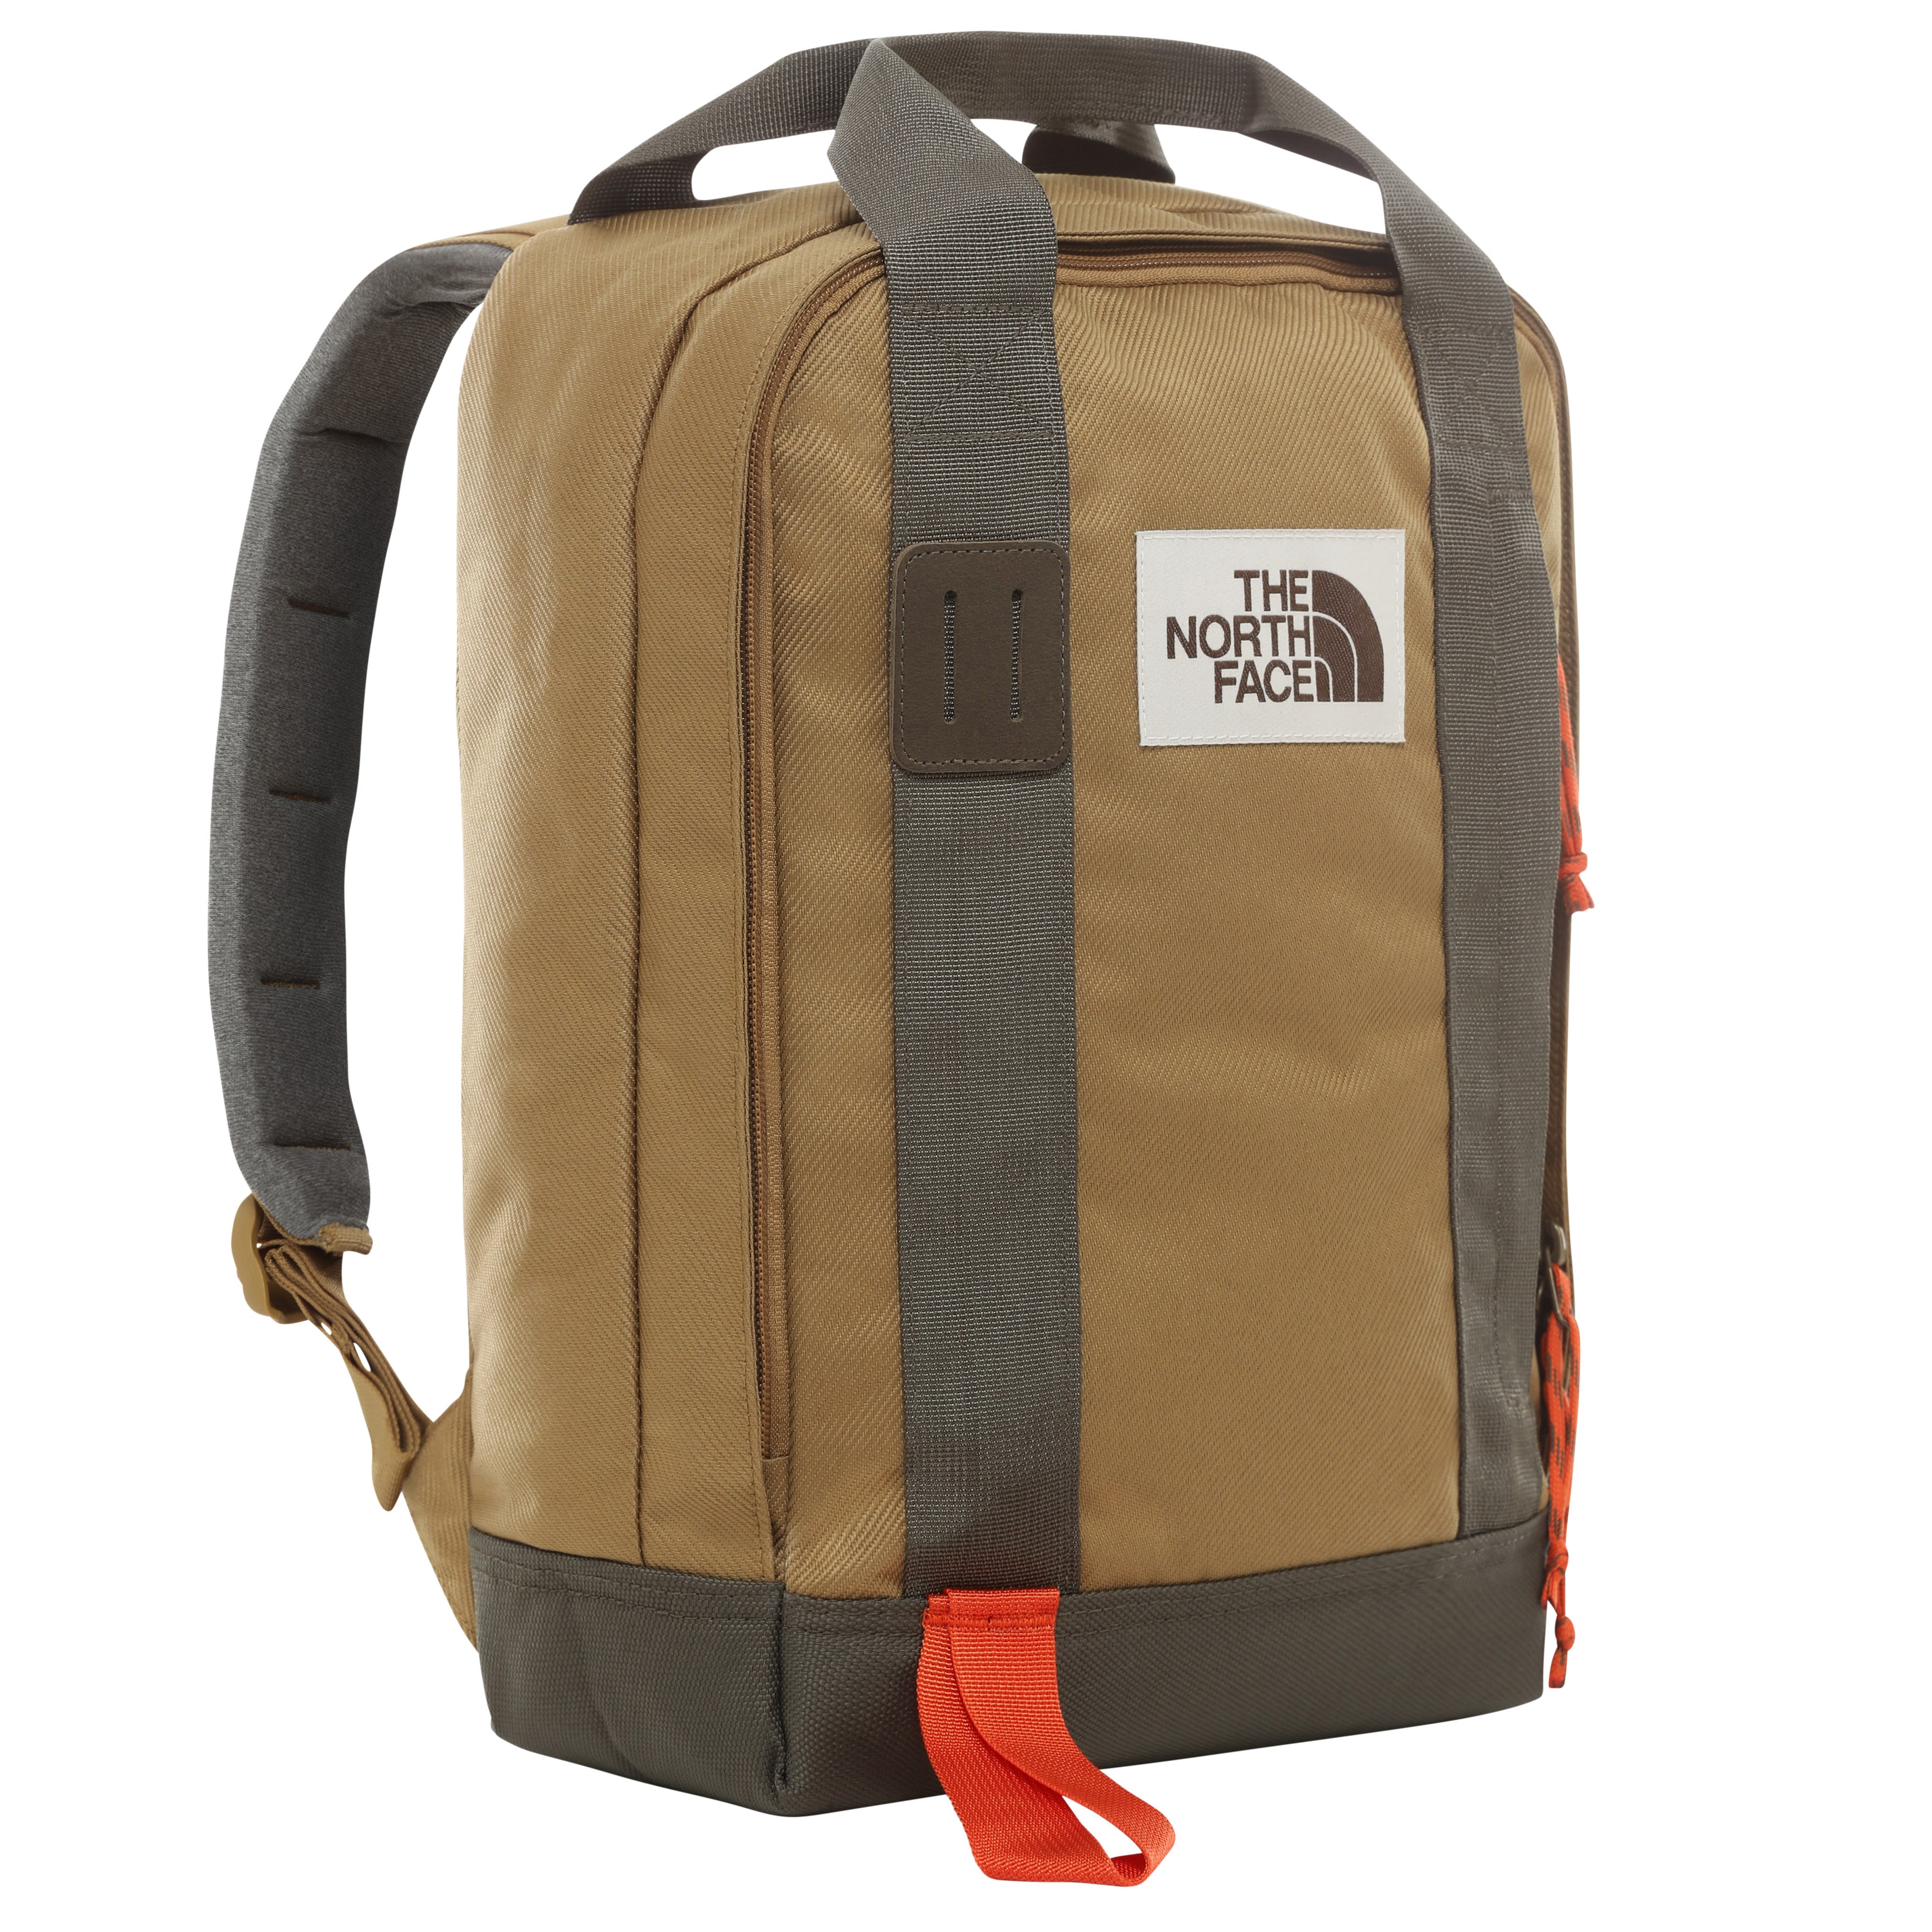 Buy The North Face Tote Pack from Outnorth